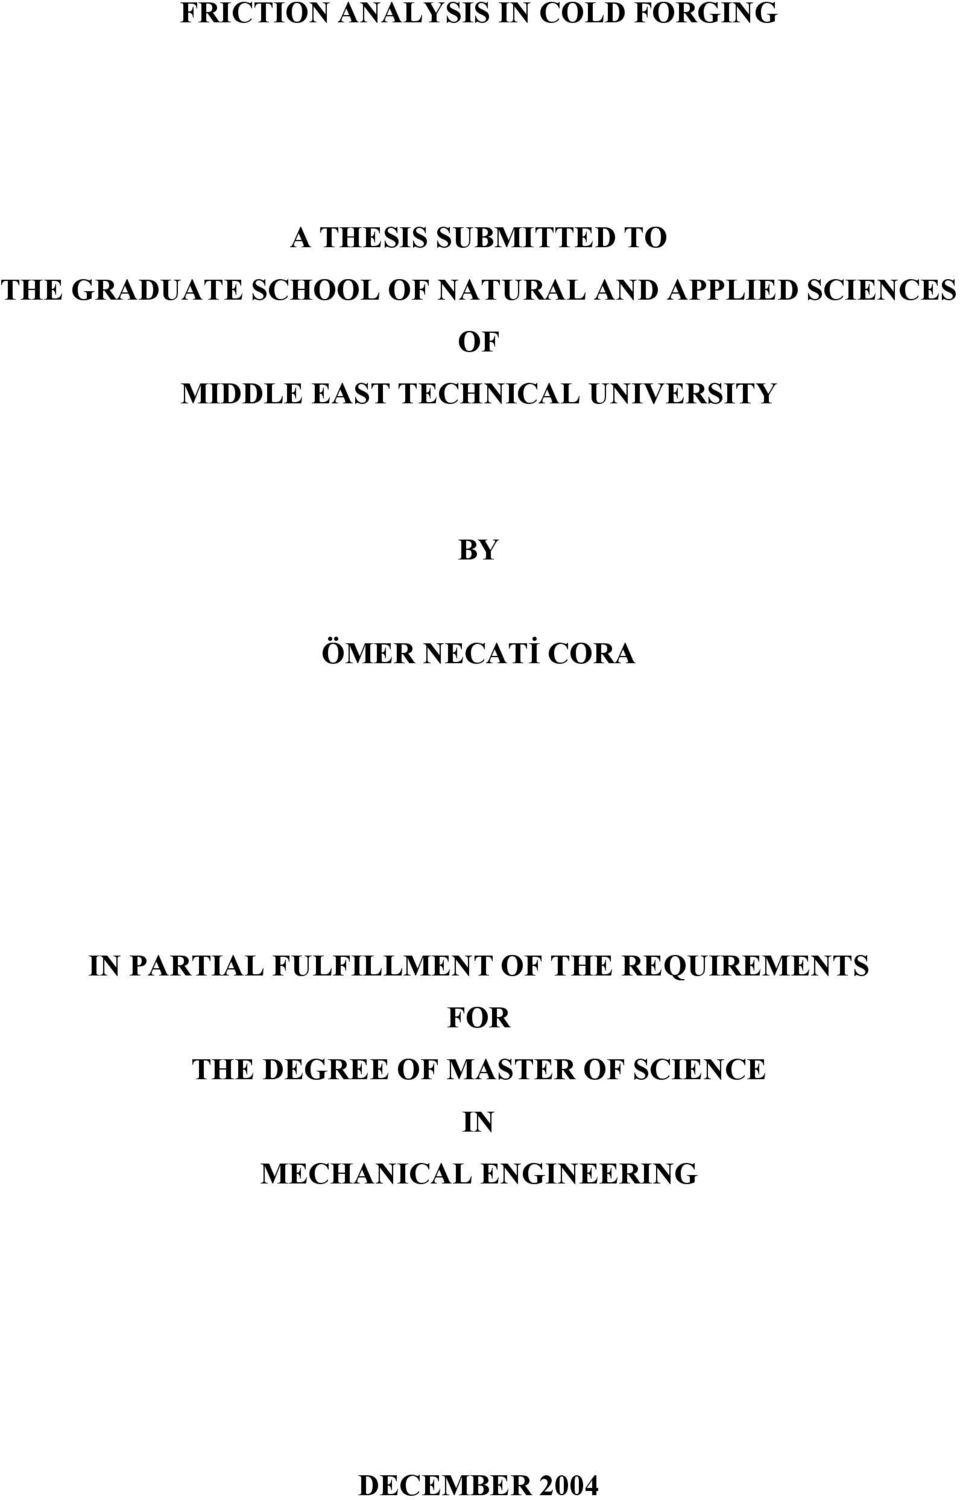 UNIVERSITY BY ÖMER NECATİ CORA IN PARTIAL FULFILLMENT OF THE